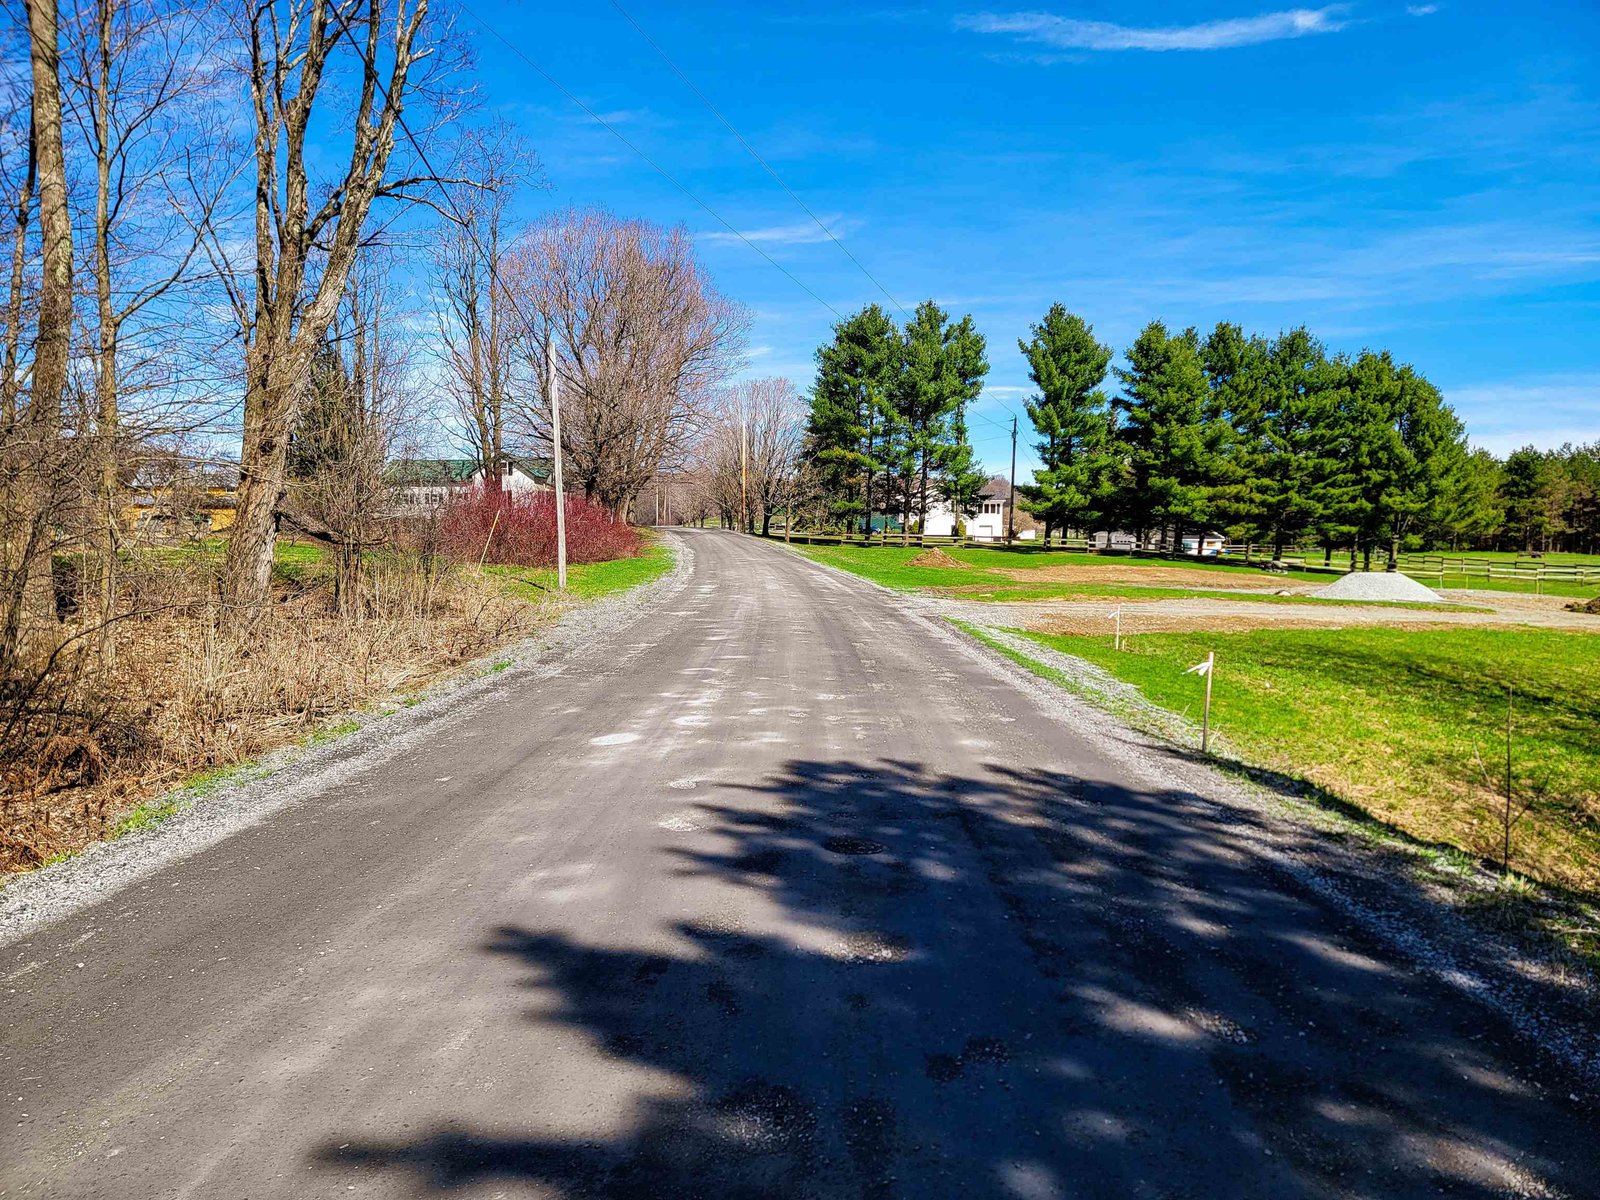 Rugg Road is a town-maintained gravel road